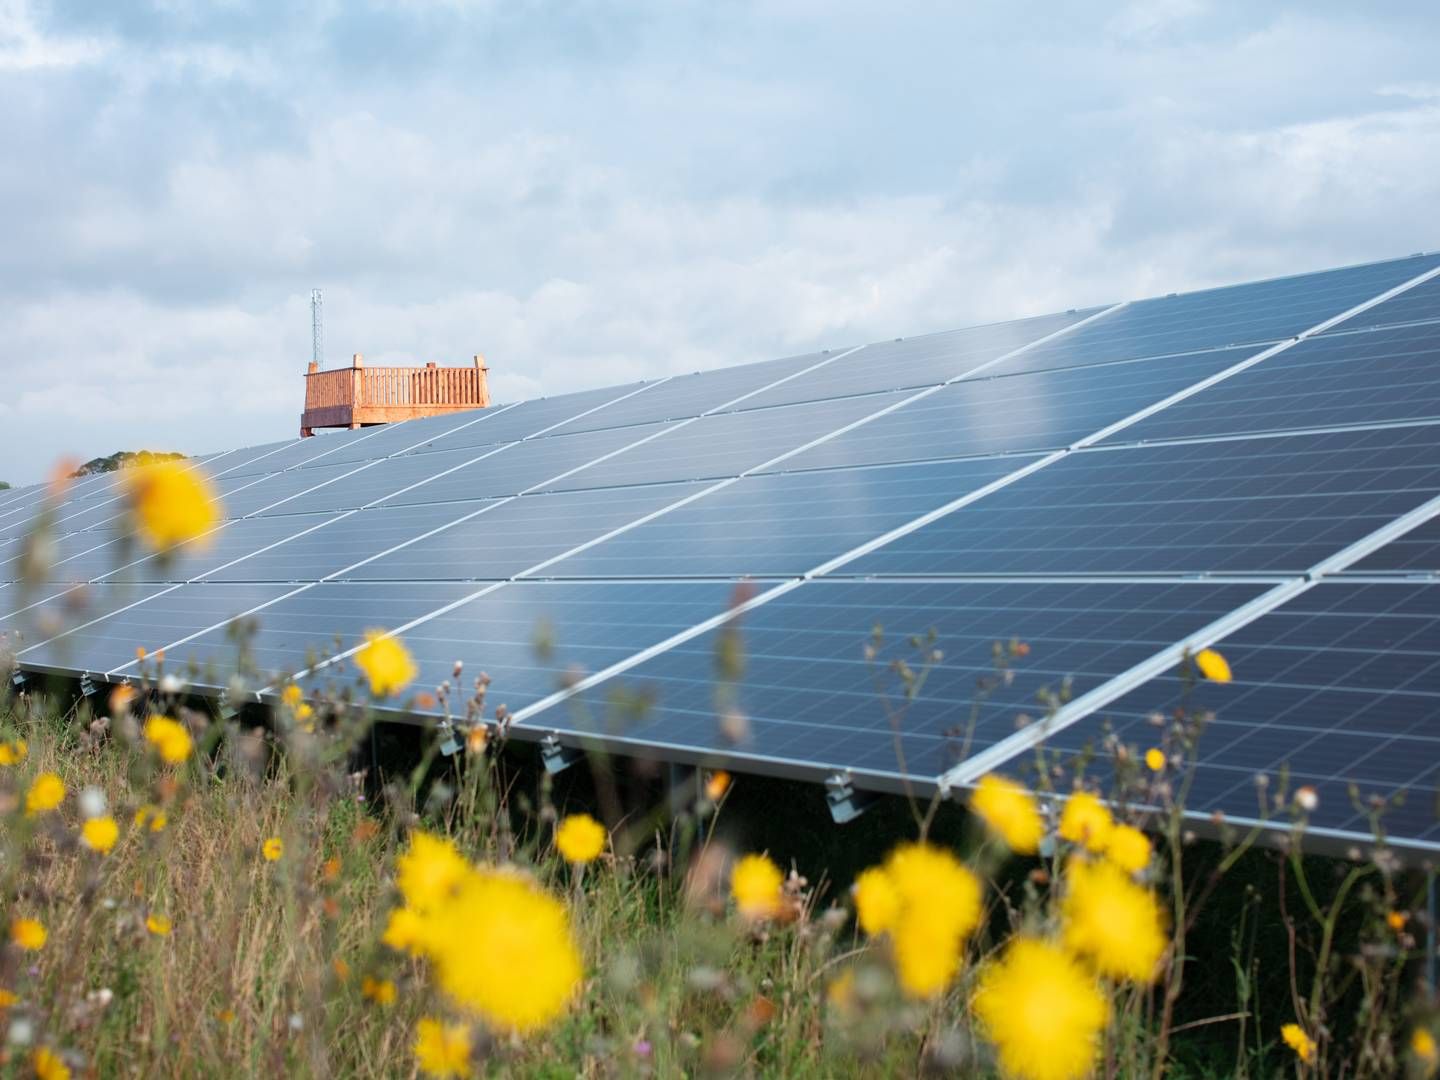 "Better Energy has proven that they are able to develop, build and connect to the grid some of Poland's largest solar farms," says Helle Ærendahl Heldbo, Head of Alternative Investments at AP Pension, which is now lending Better Energy EUR 65m to set up solar farms in Poland. | Photo: Better Energy